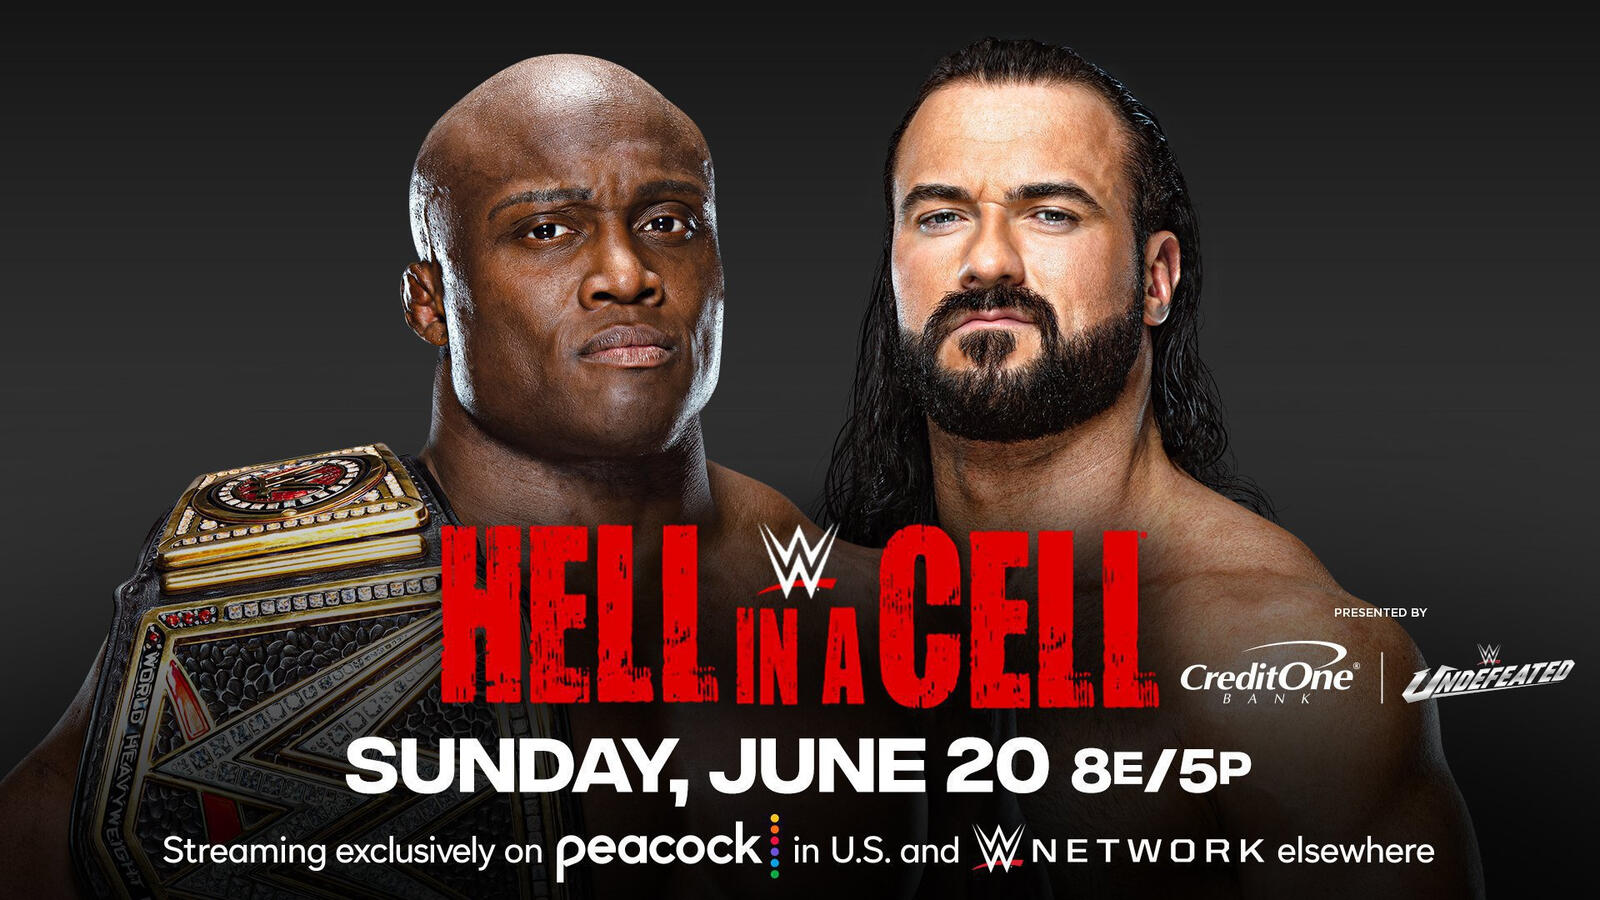 WWE Title Match Set For Hell In a Cell